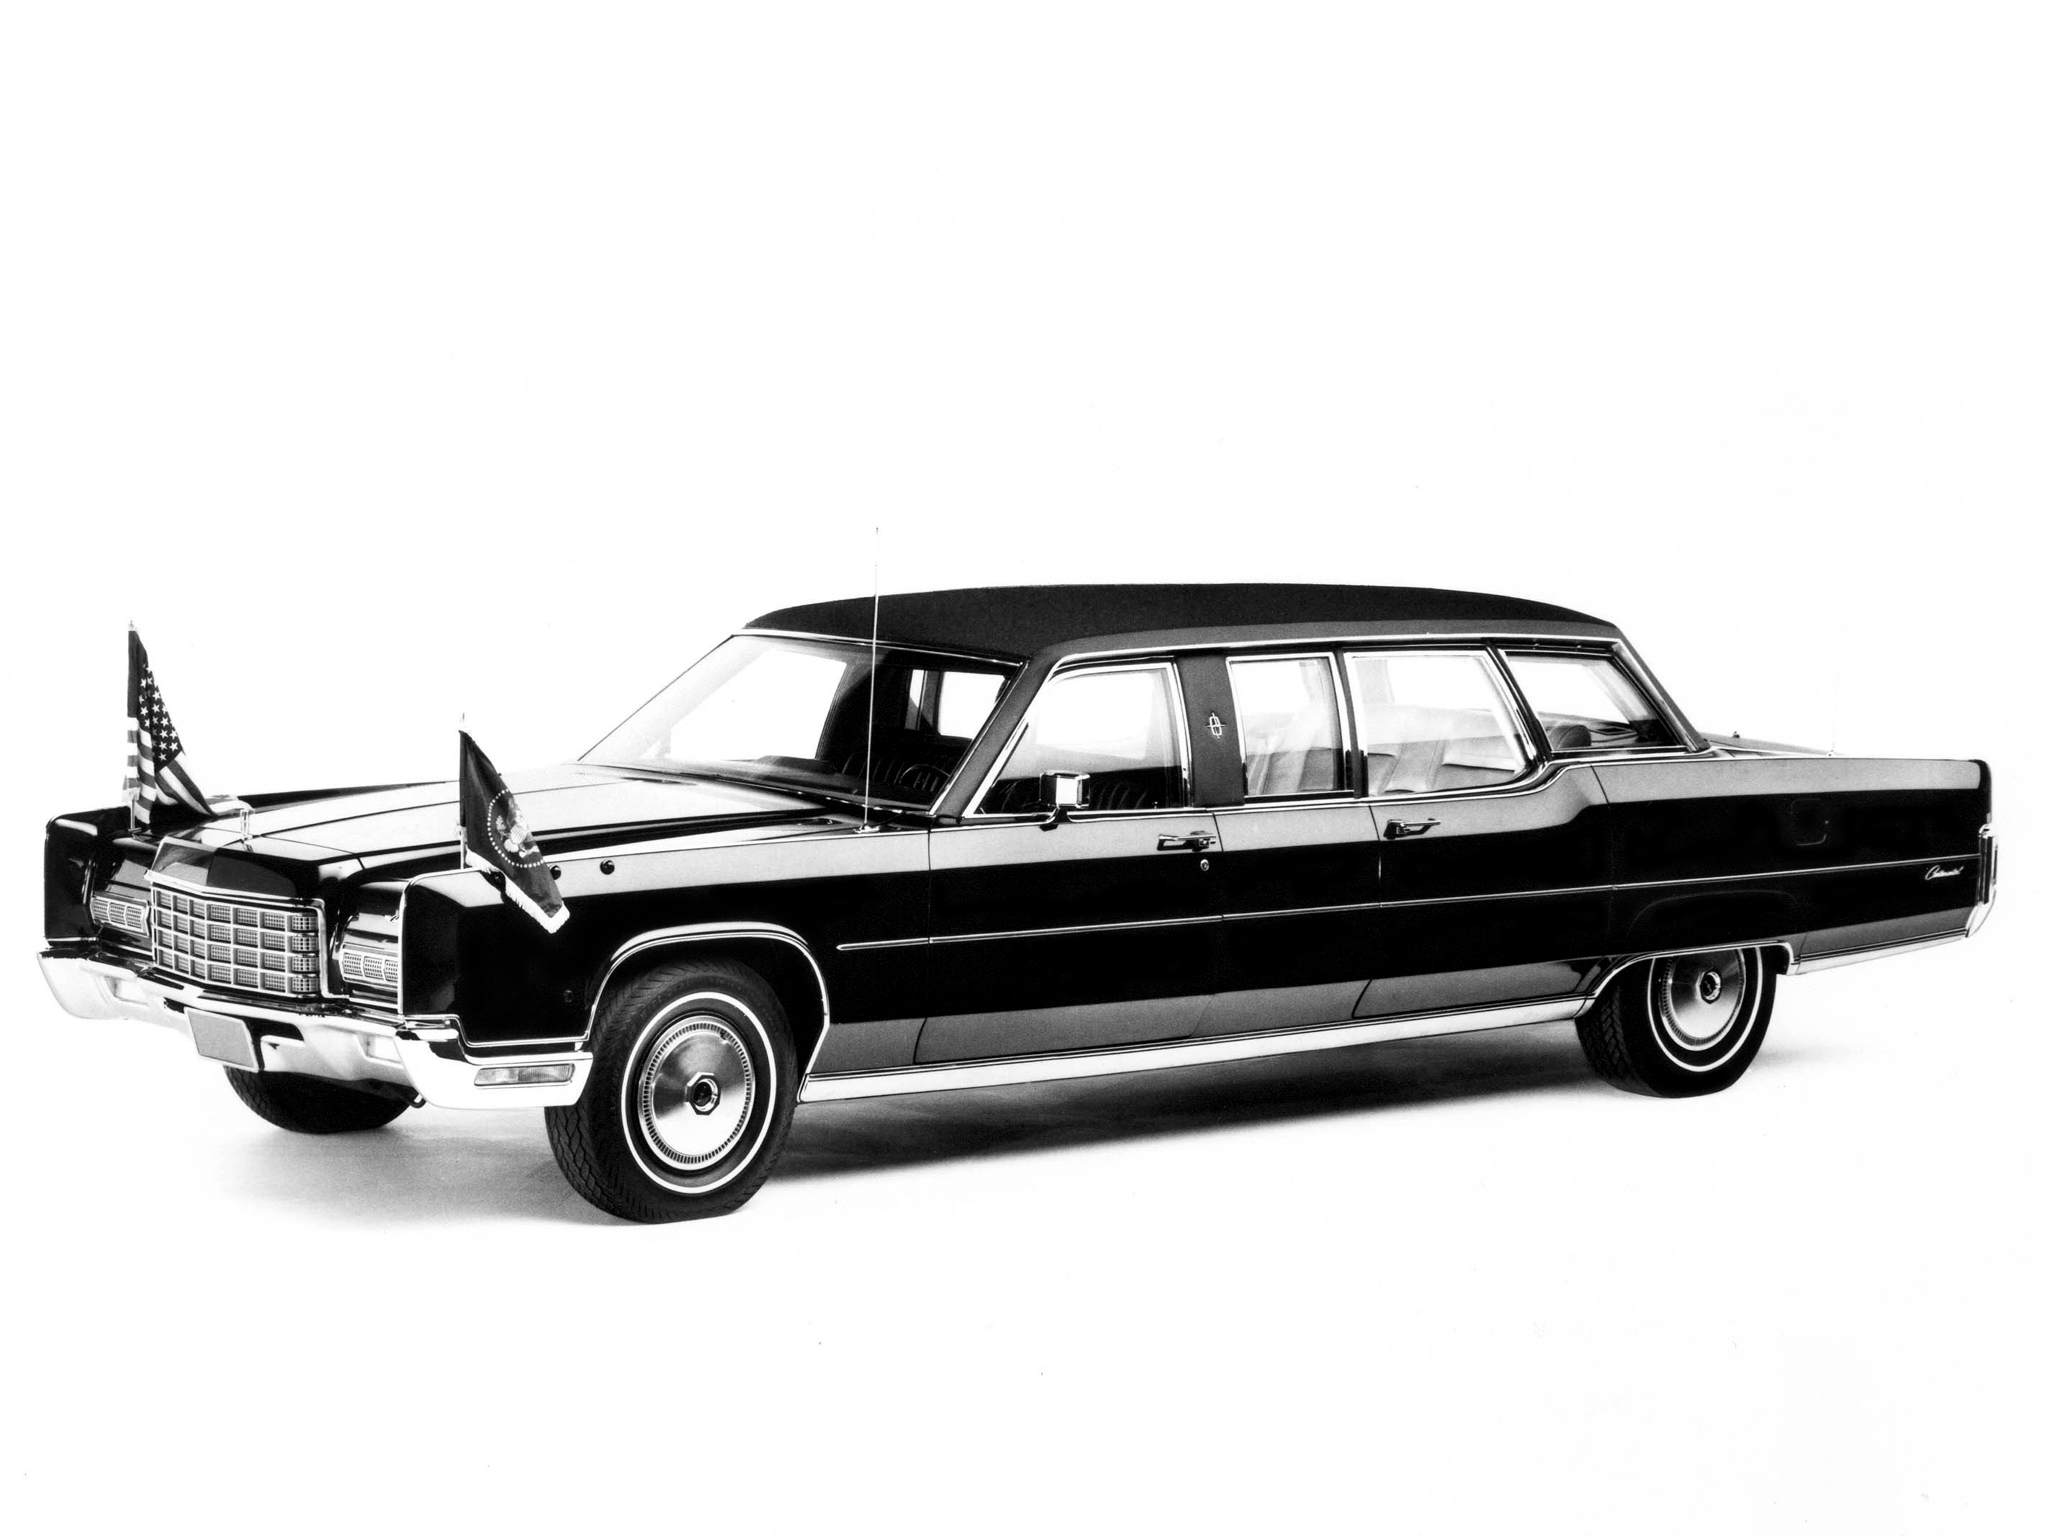 1972, Armored, Lincoln, Continental, Presidential, Limousine, Luxury, Classic Wallpaper